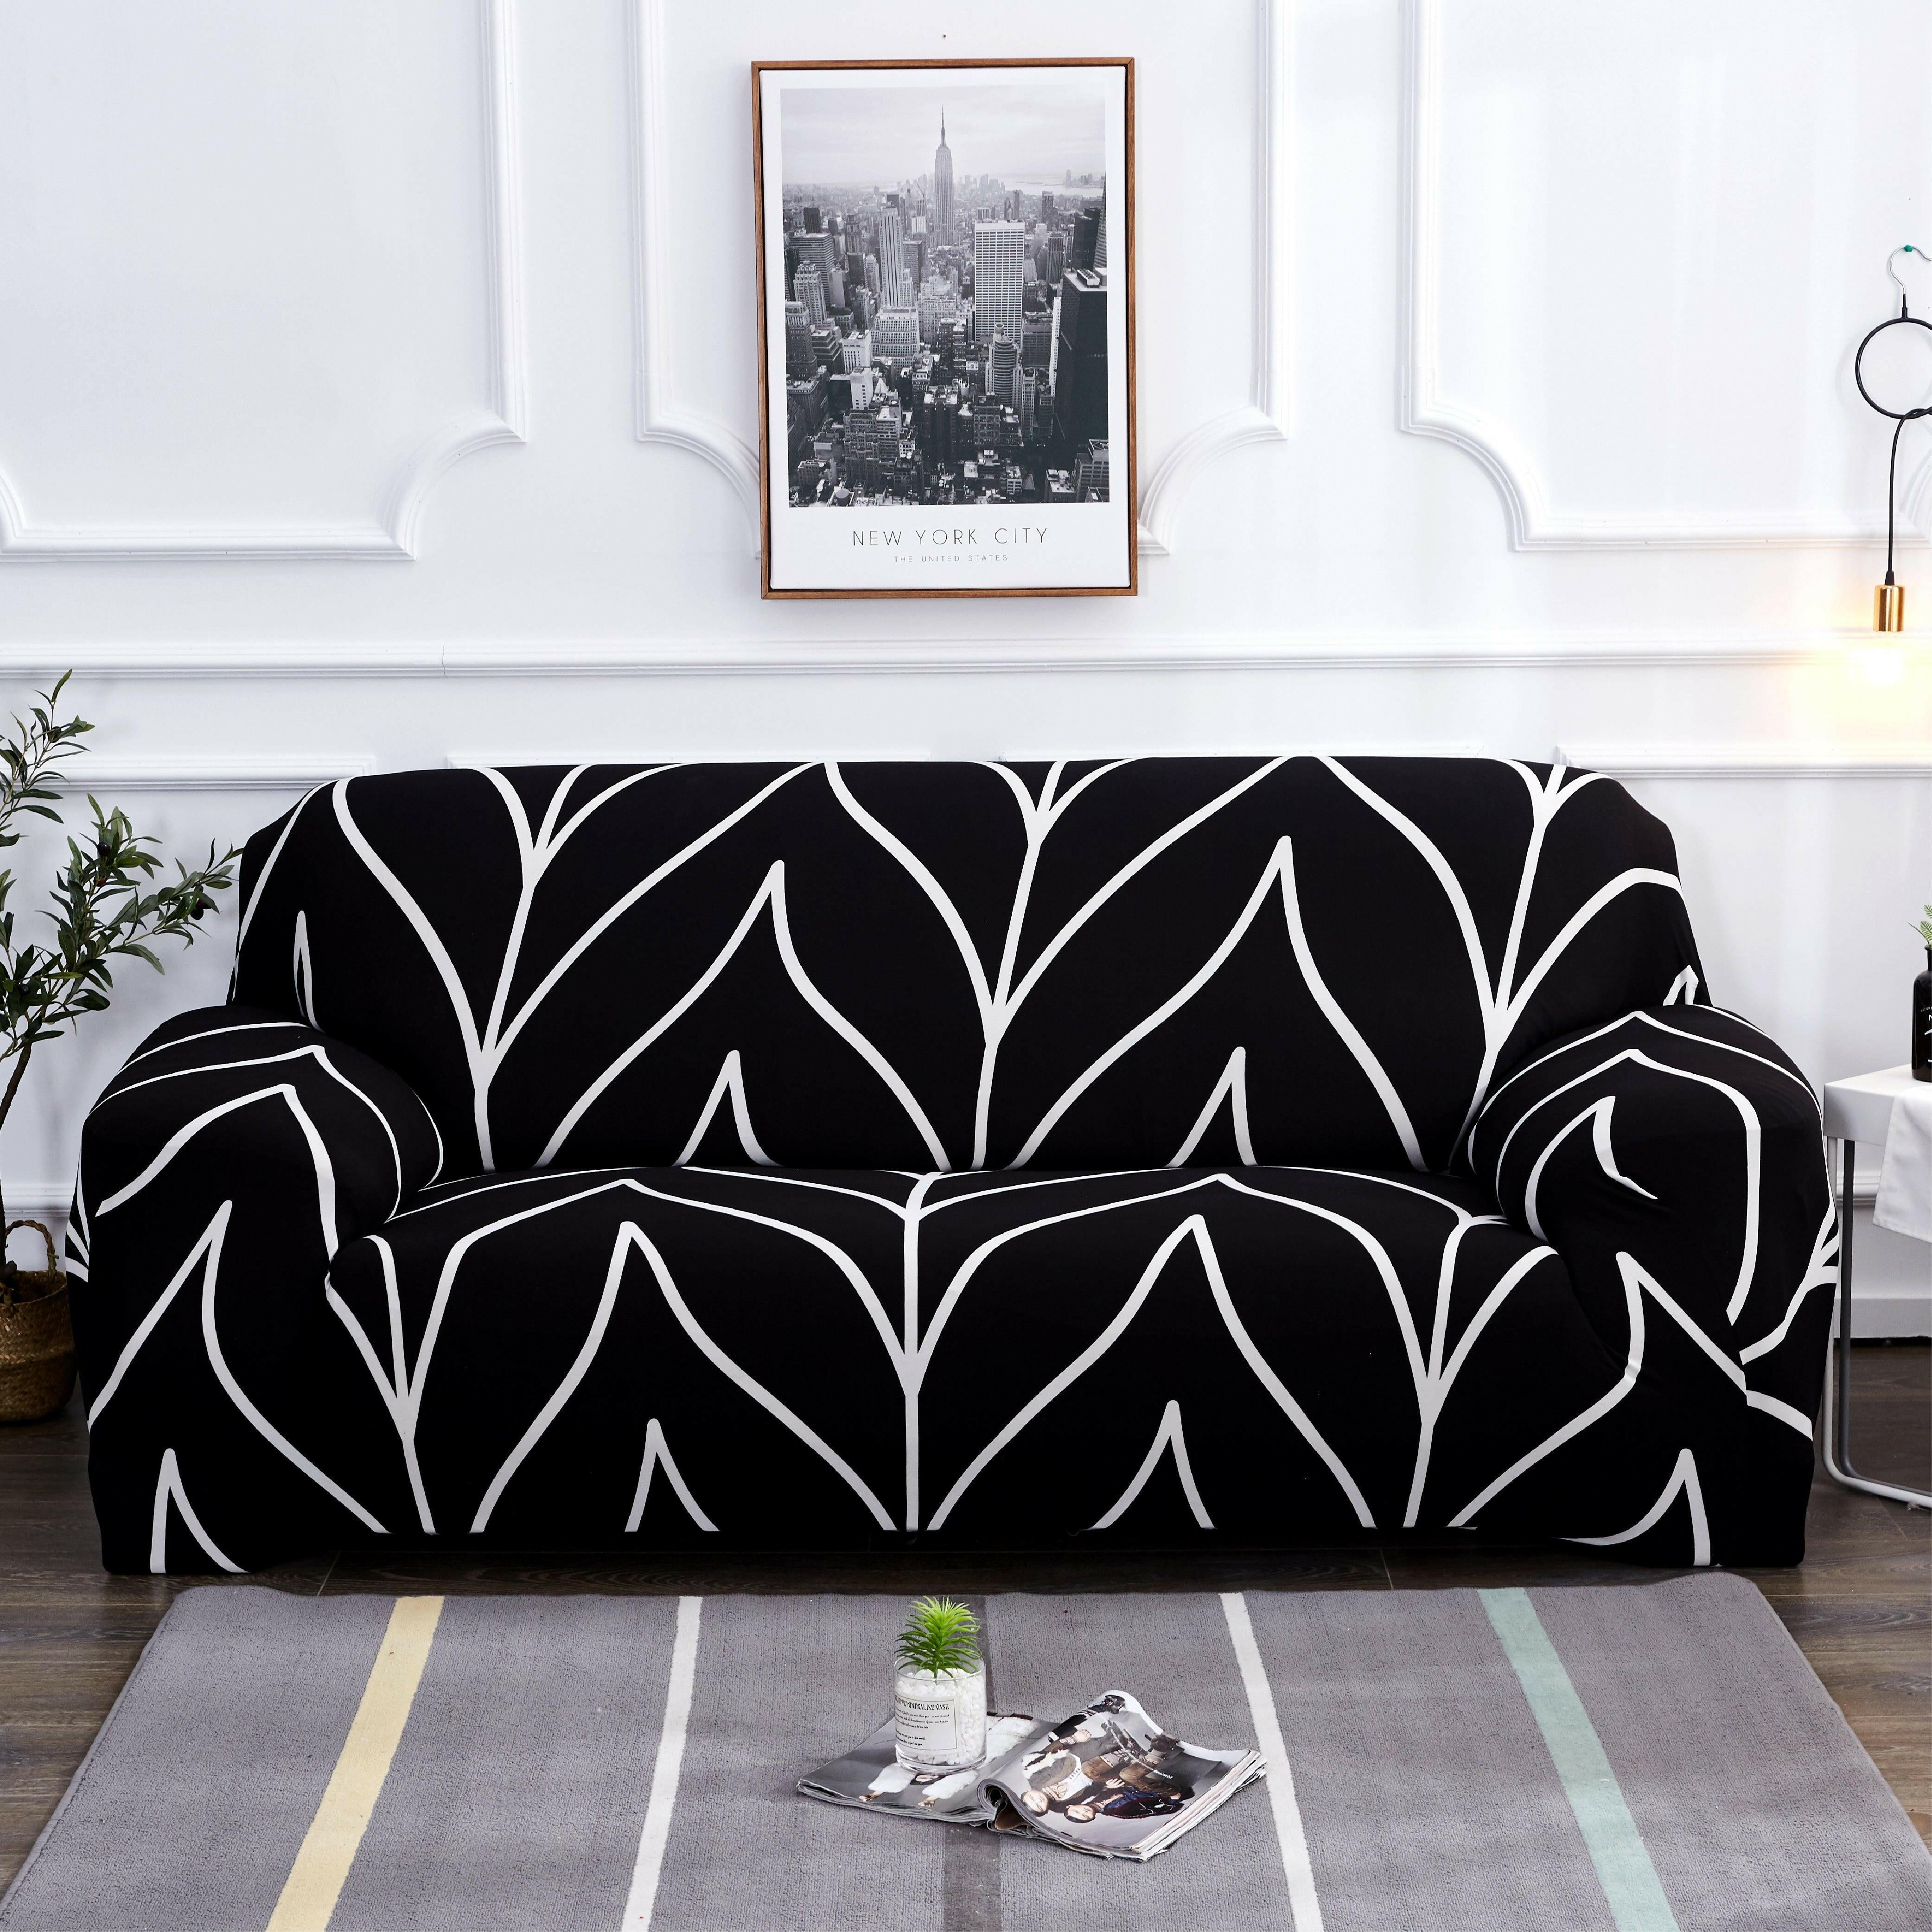 Hyper Cover Stretch Sofa Cover with Patterns Black Tone | Sofa Covers | Brilliant Home Living